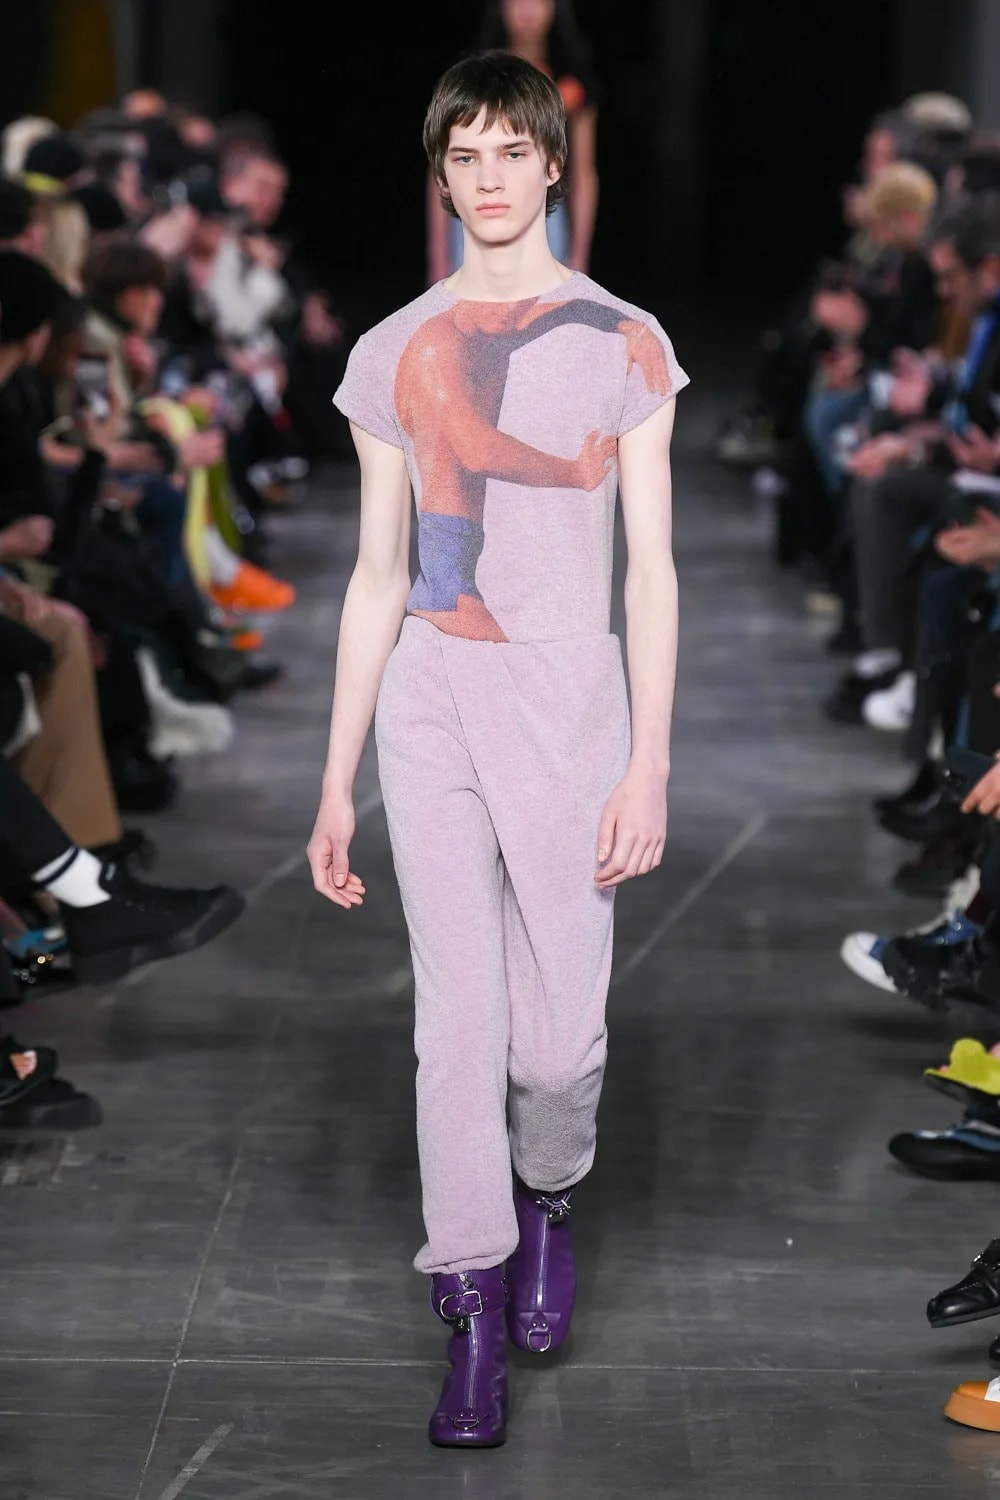 JW ANDERSON AW18, RUNWAY, JW Anderson's Projects